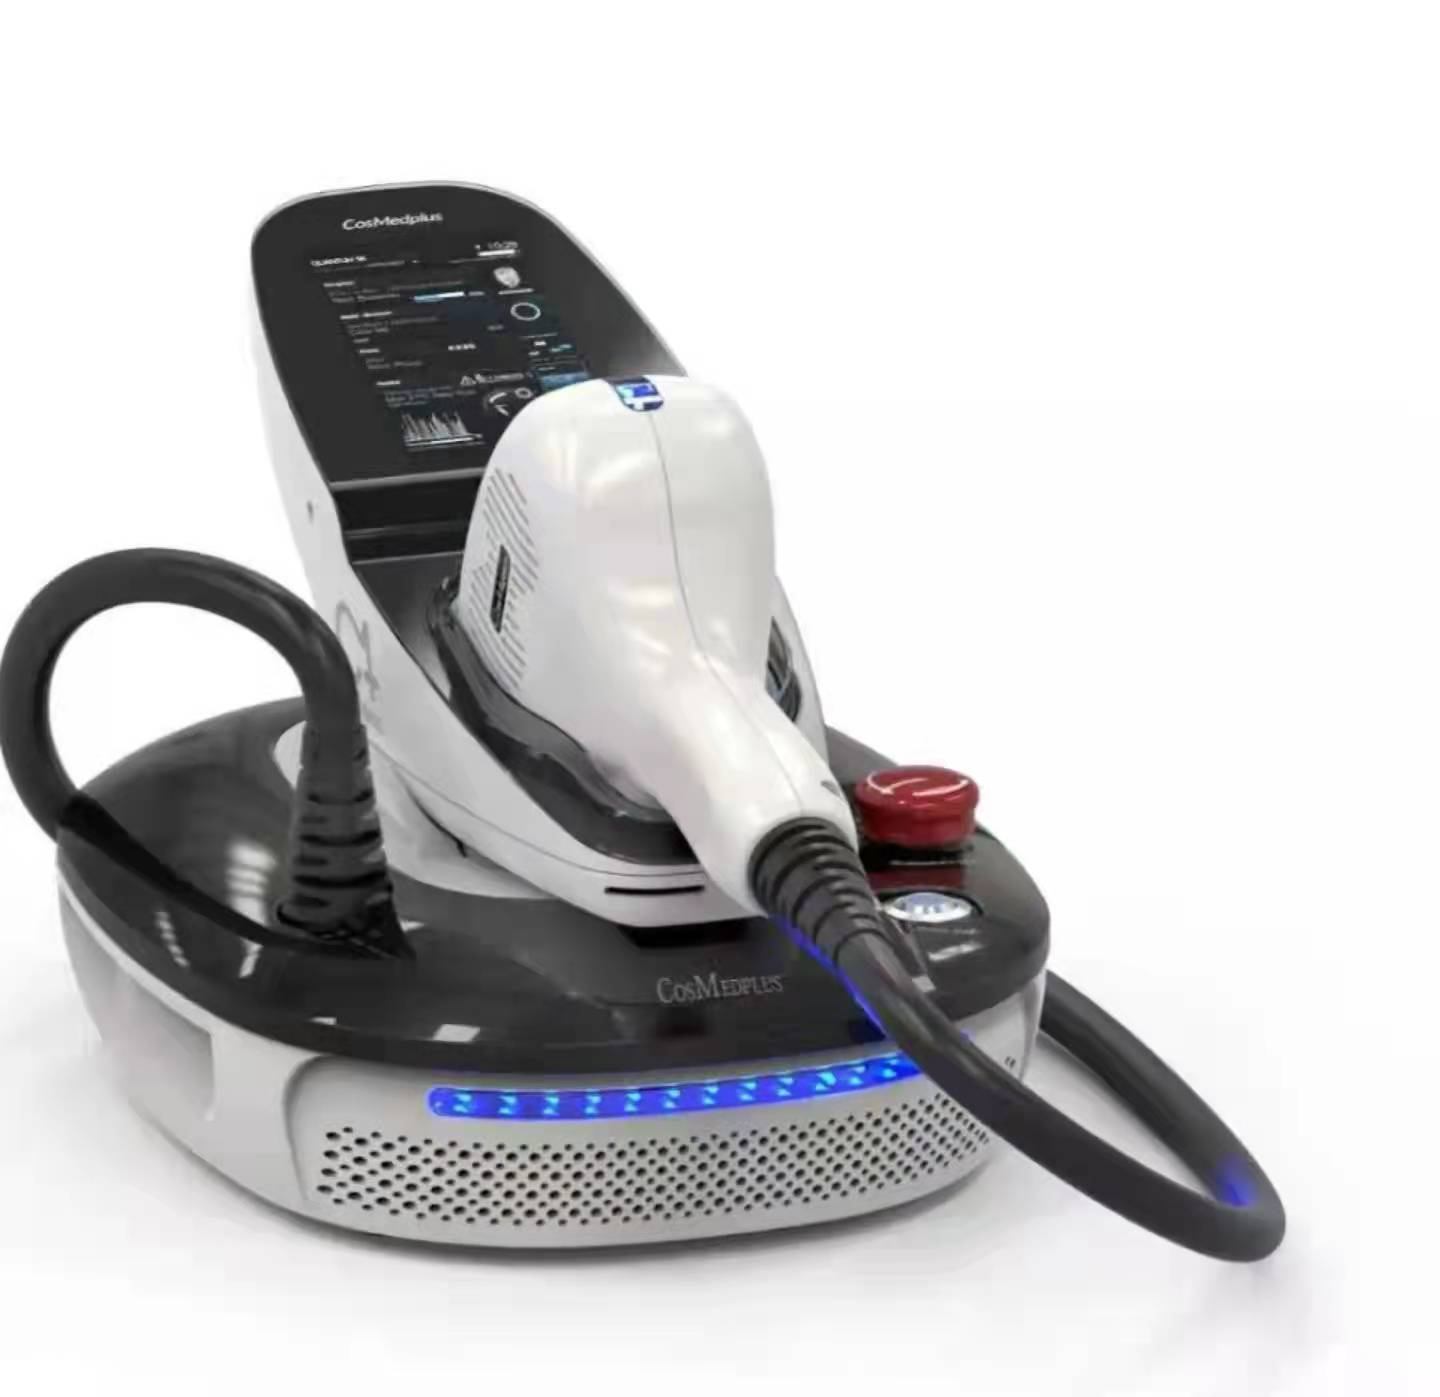 Professional 808 elight lazer hair removal machine Featured Image